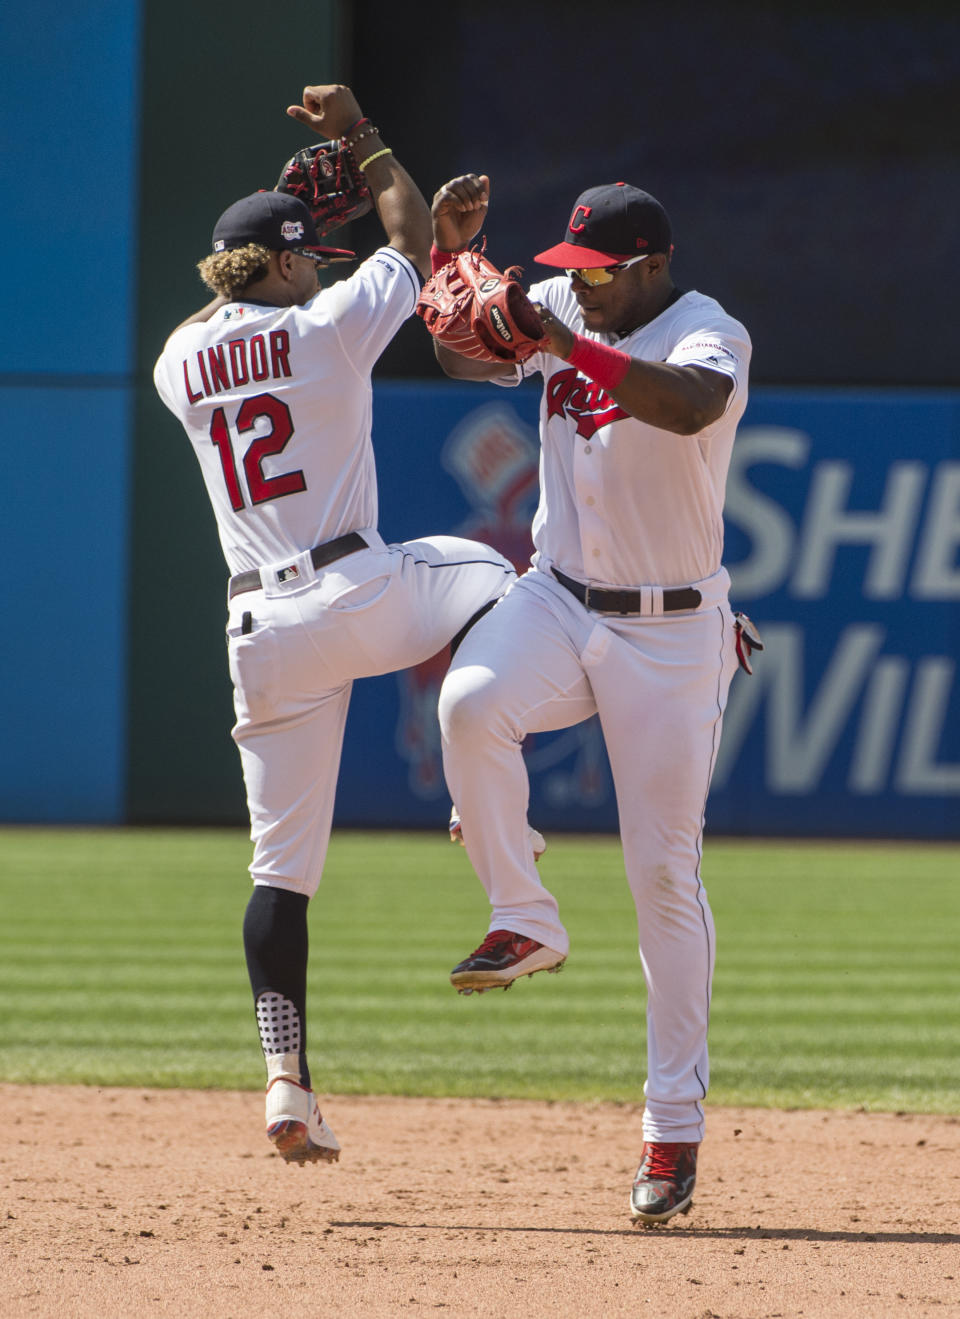 Cleveland Indians' Francisco Lindor and Yasiel Puig celebrate the Indians 2-0 win over the Texas Rangers at the end of the first game of a baseball doubleheader in Cleveland, Wednesday, Aug. 7, 2019. (AP Photo/Phil Long)